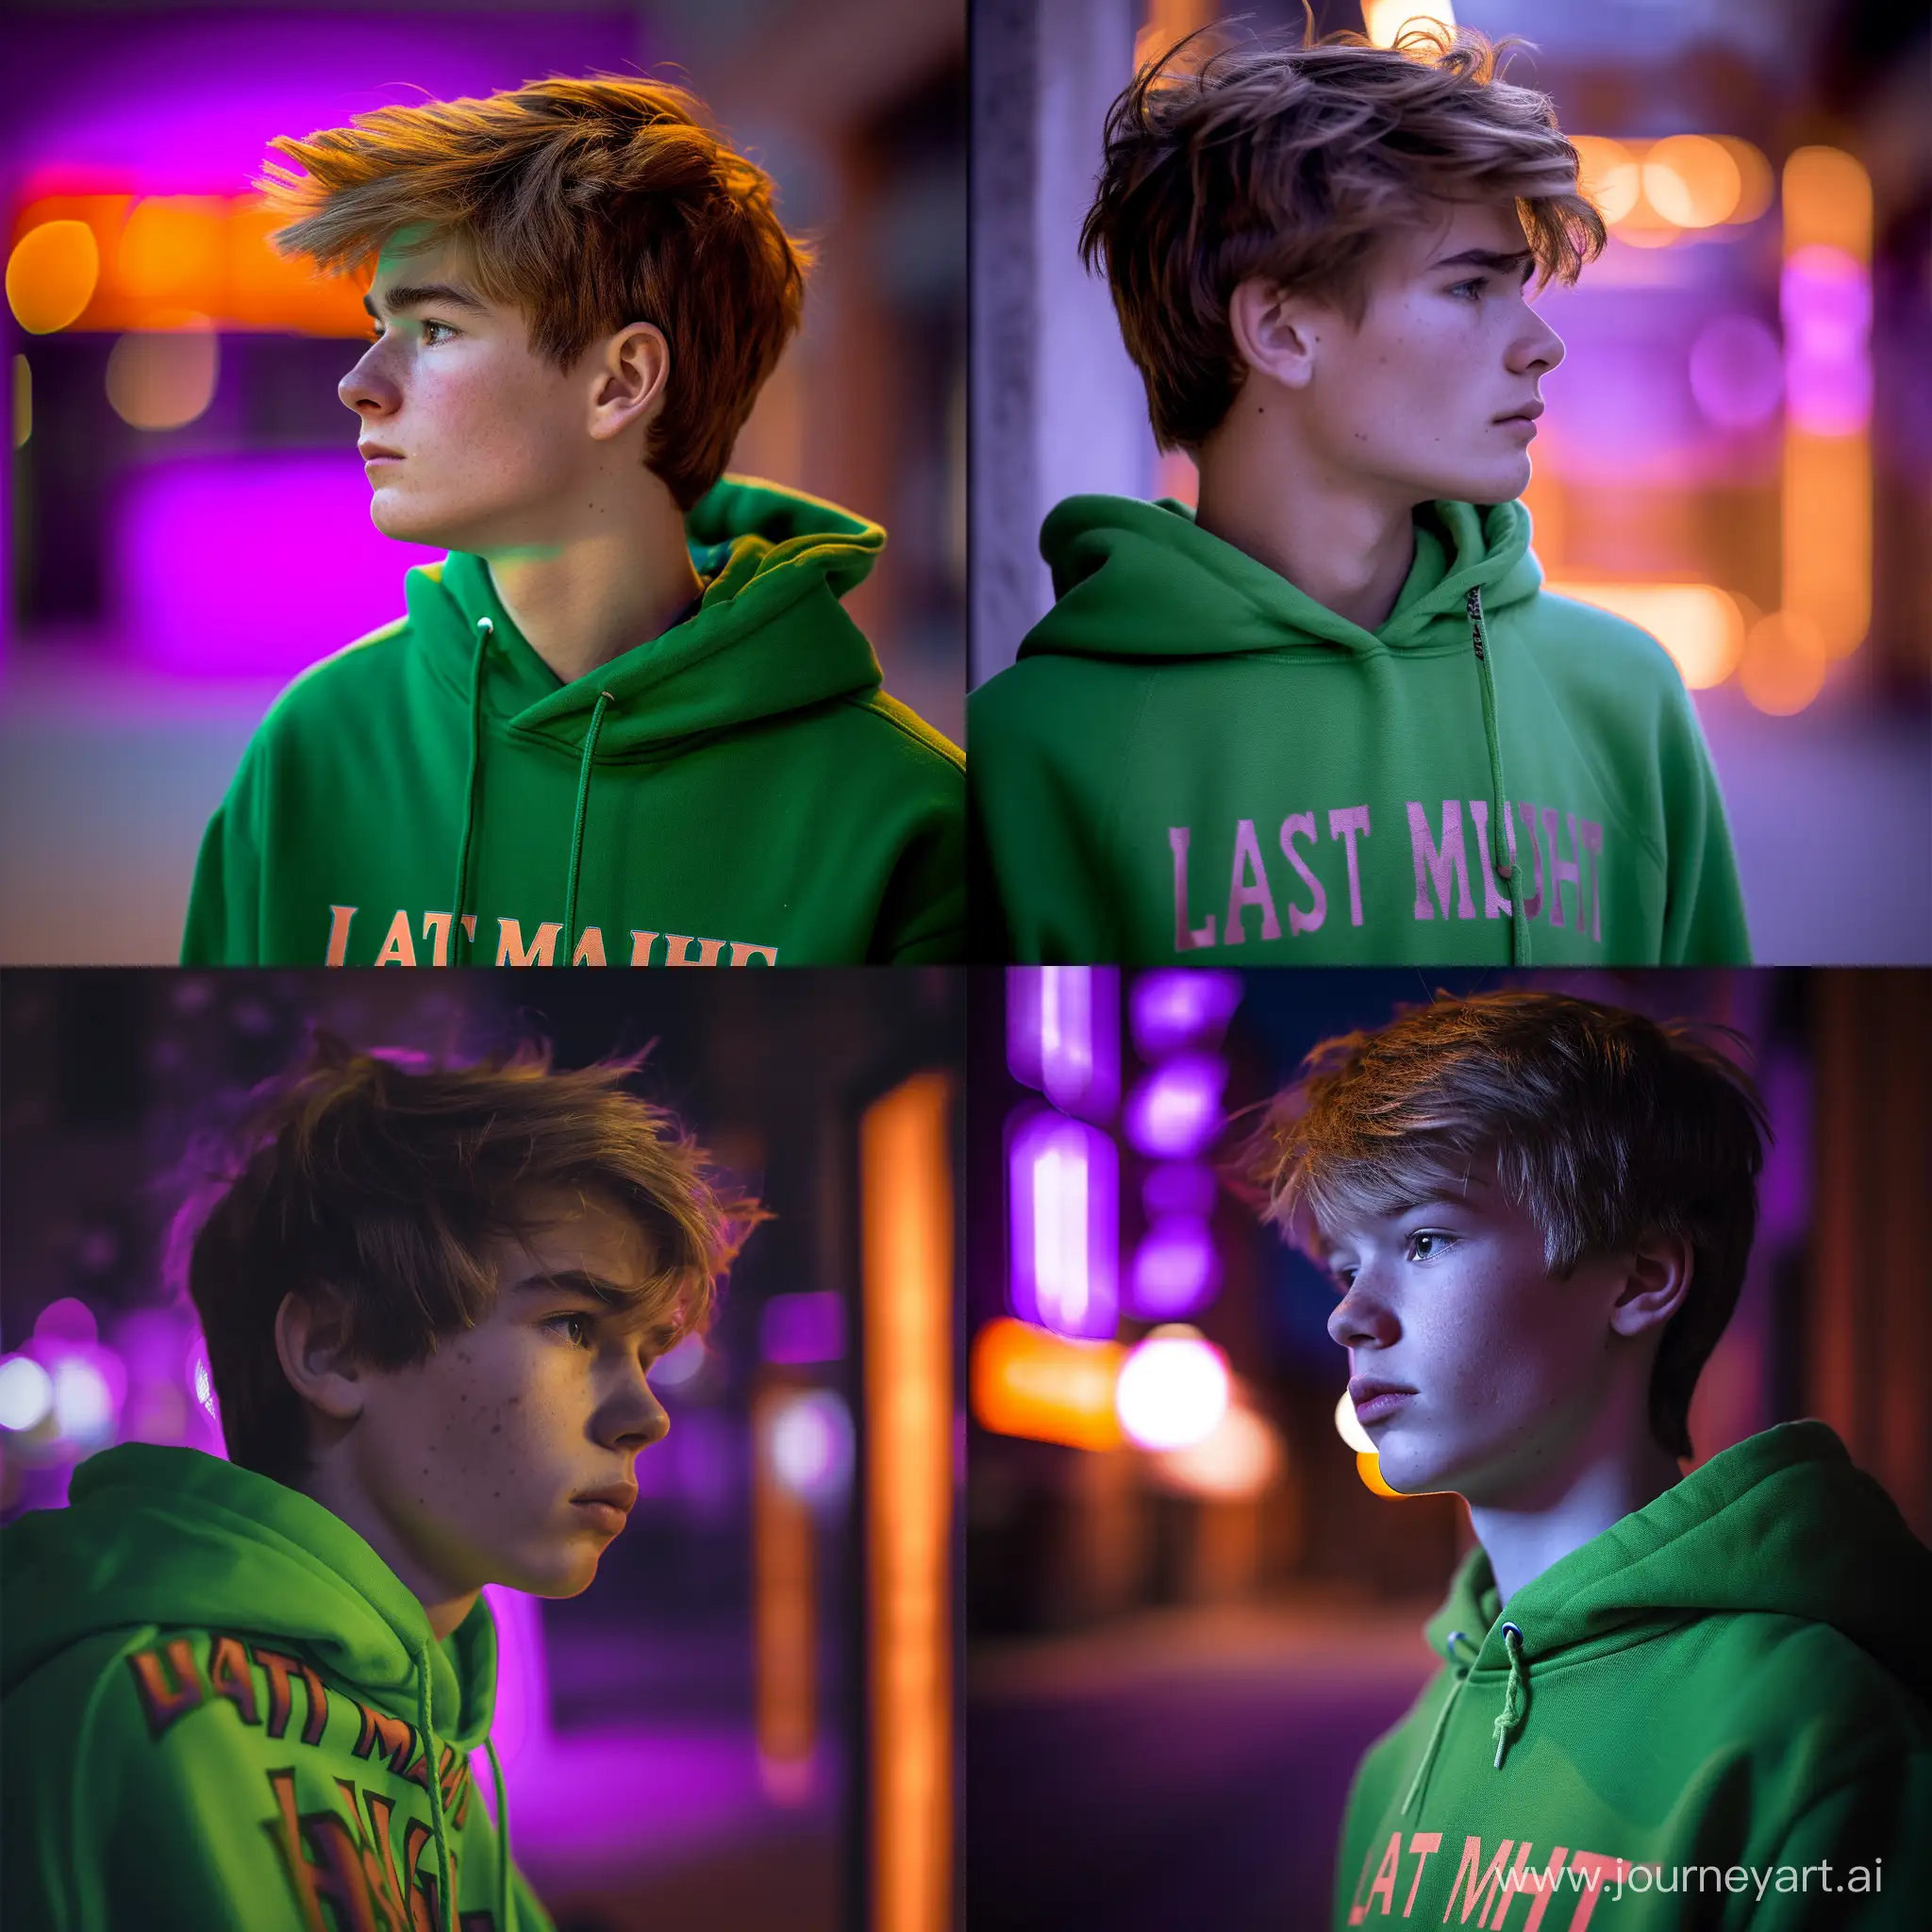 Contemplative-Urban-Style-Teenager-in-LAST-MATCH-Green-Hoodie